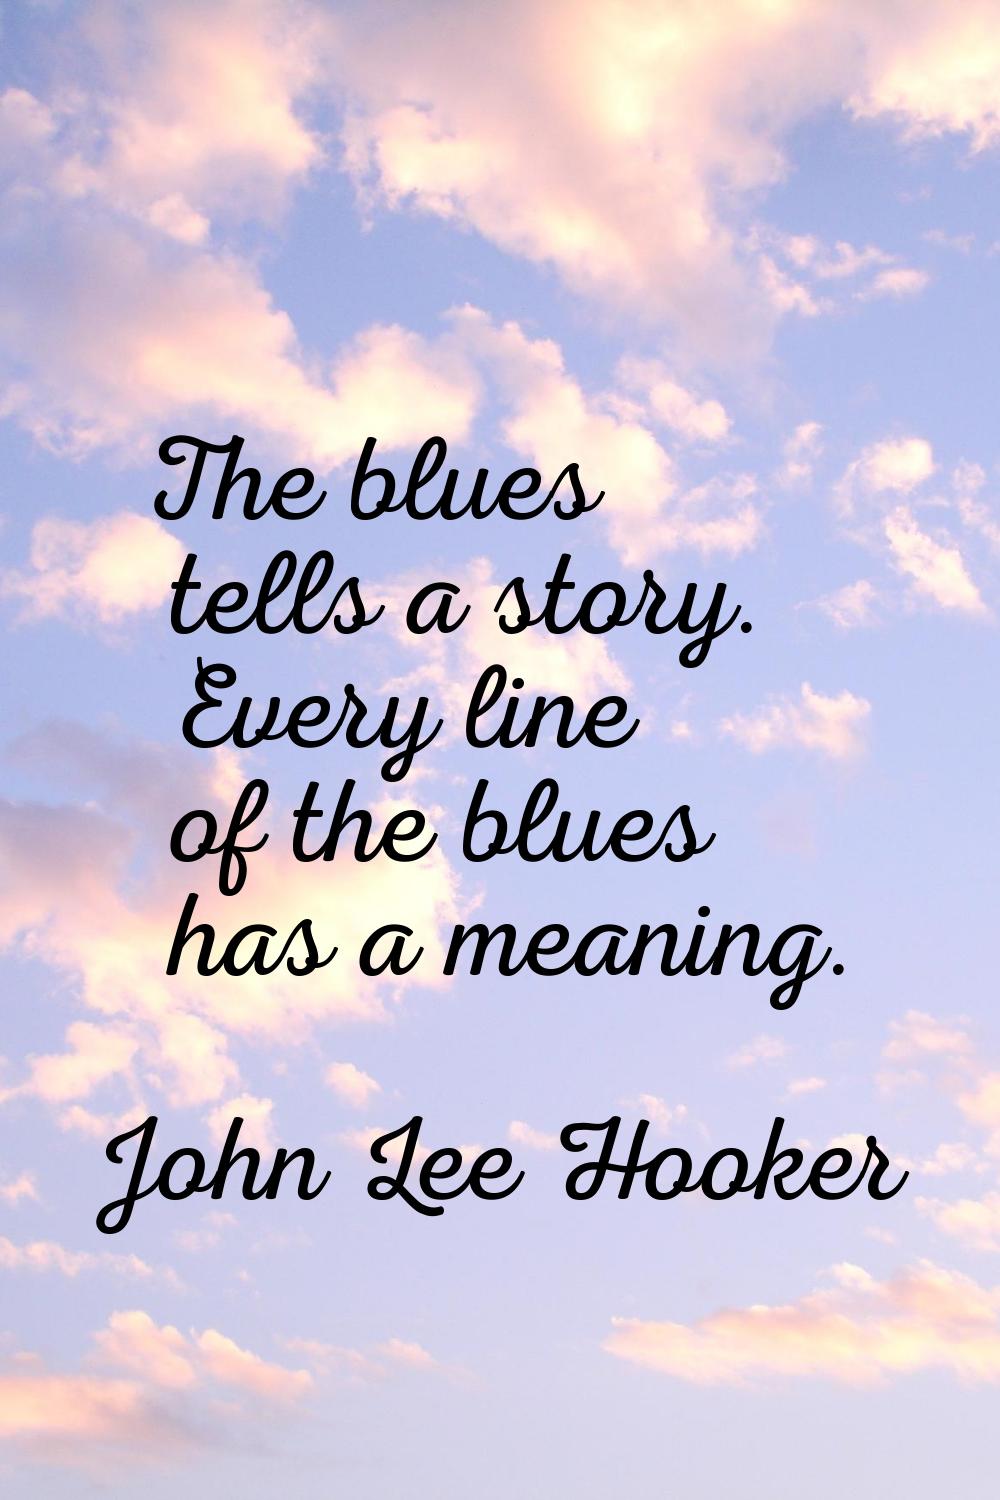 The blues tells a story. Every line of the blues has a meaning.